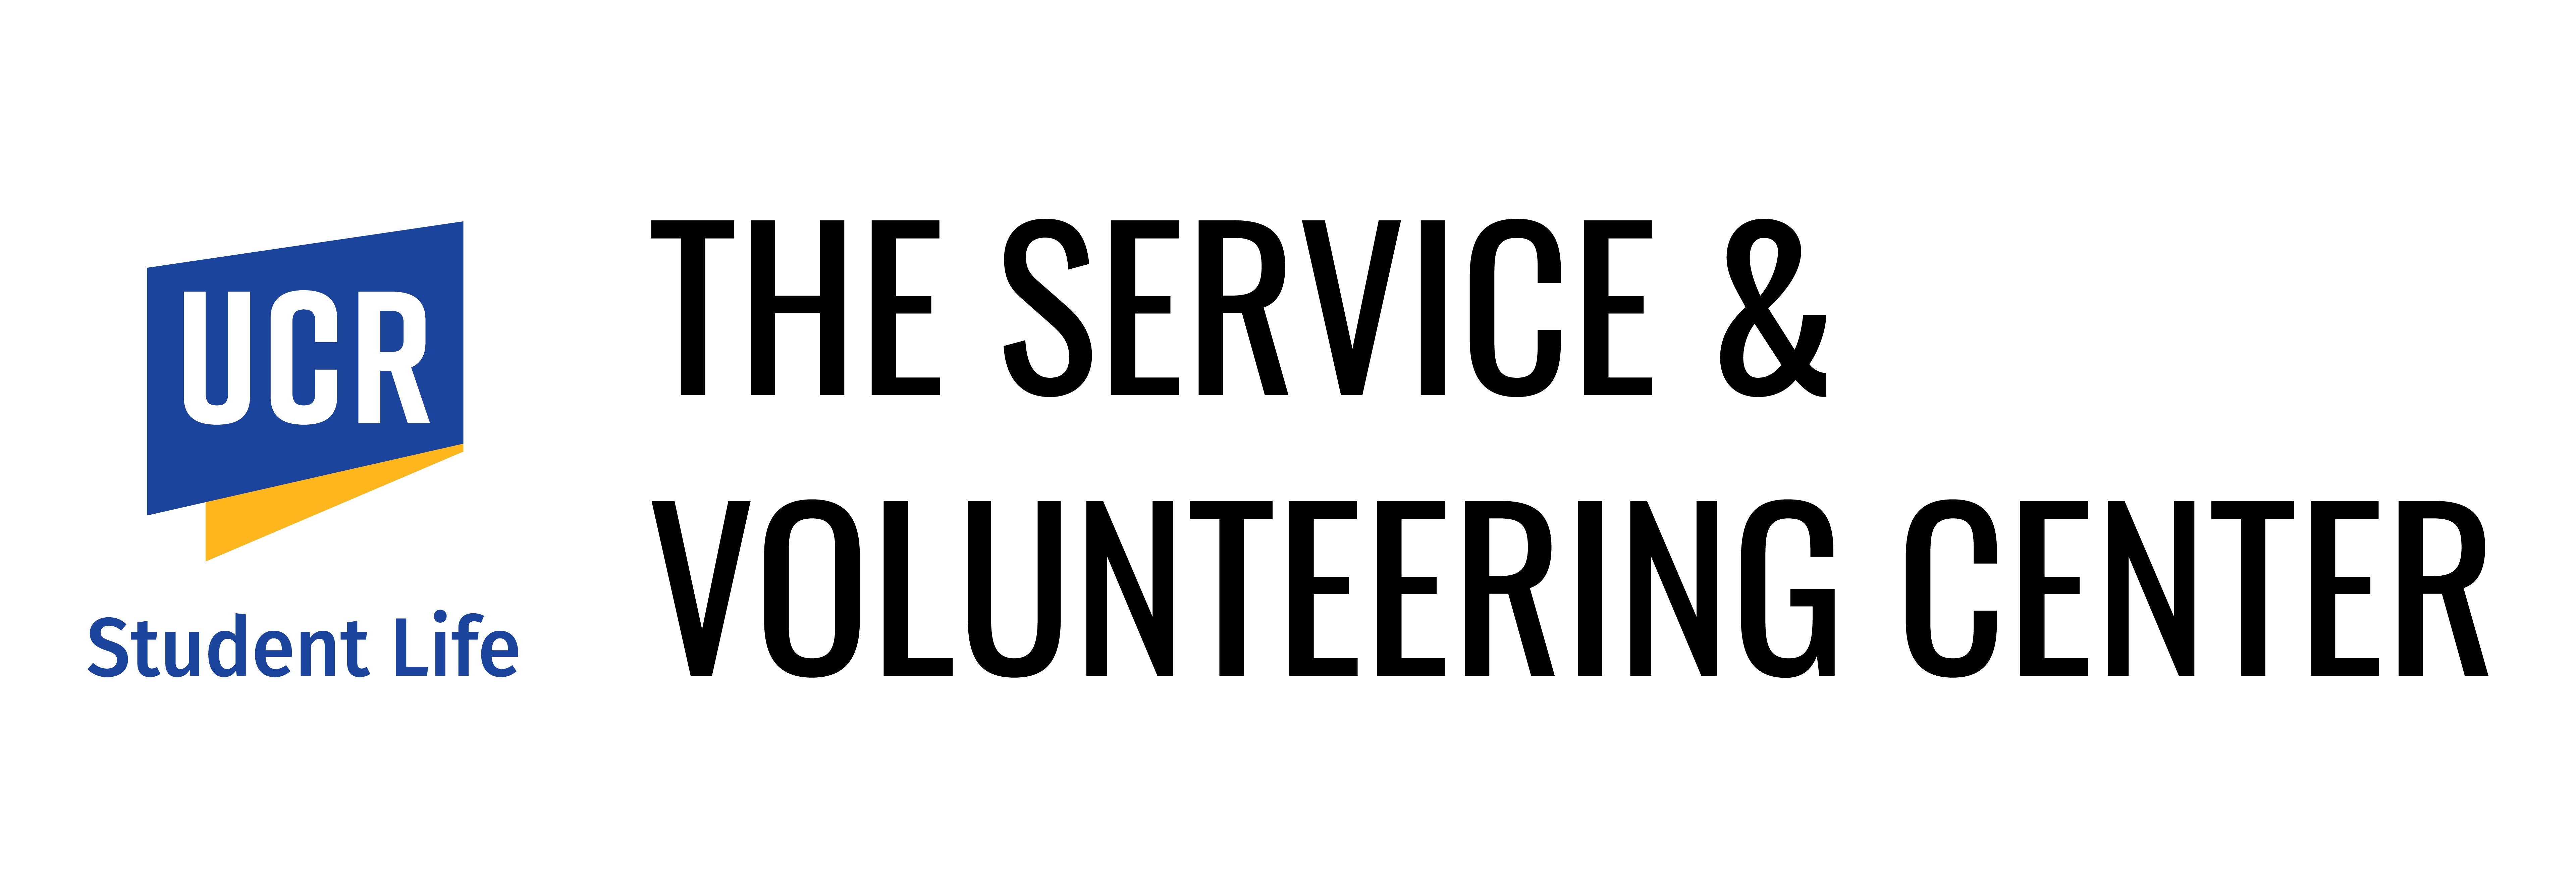 Volunteering and Service Center Banner